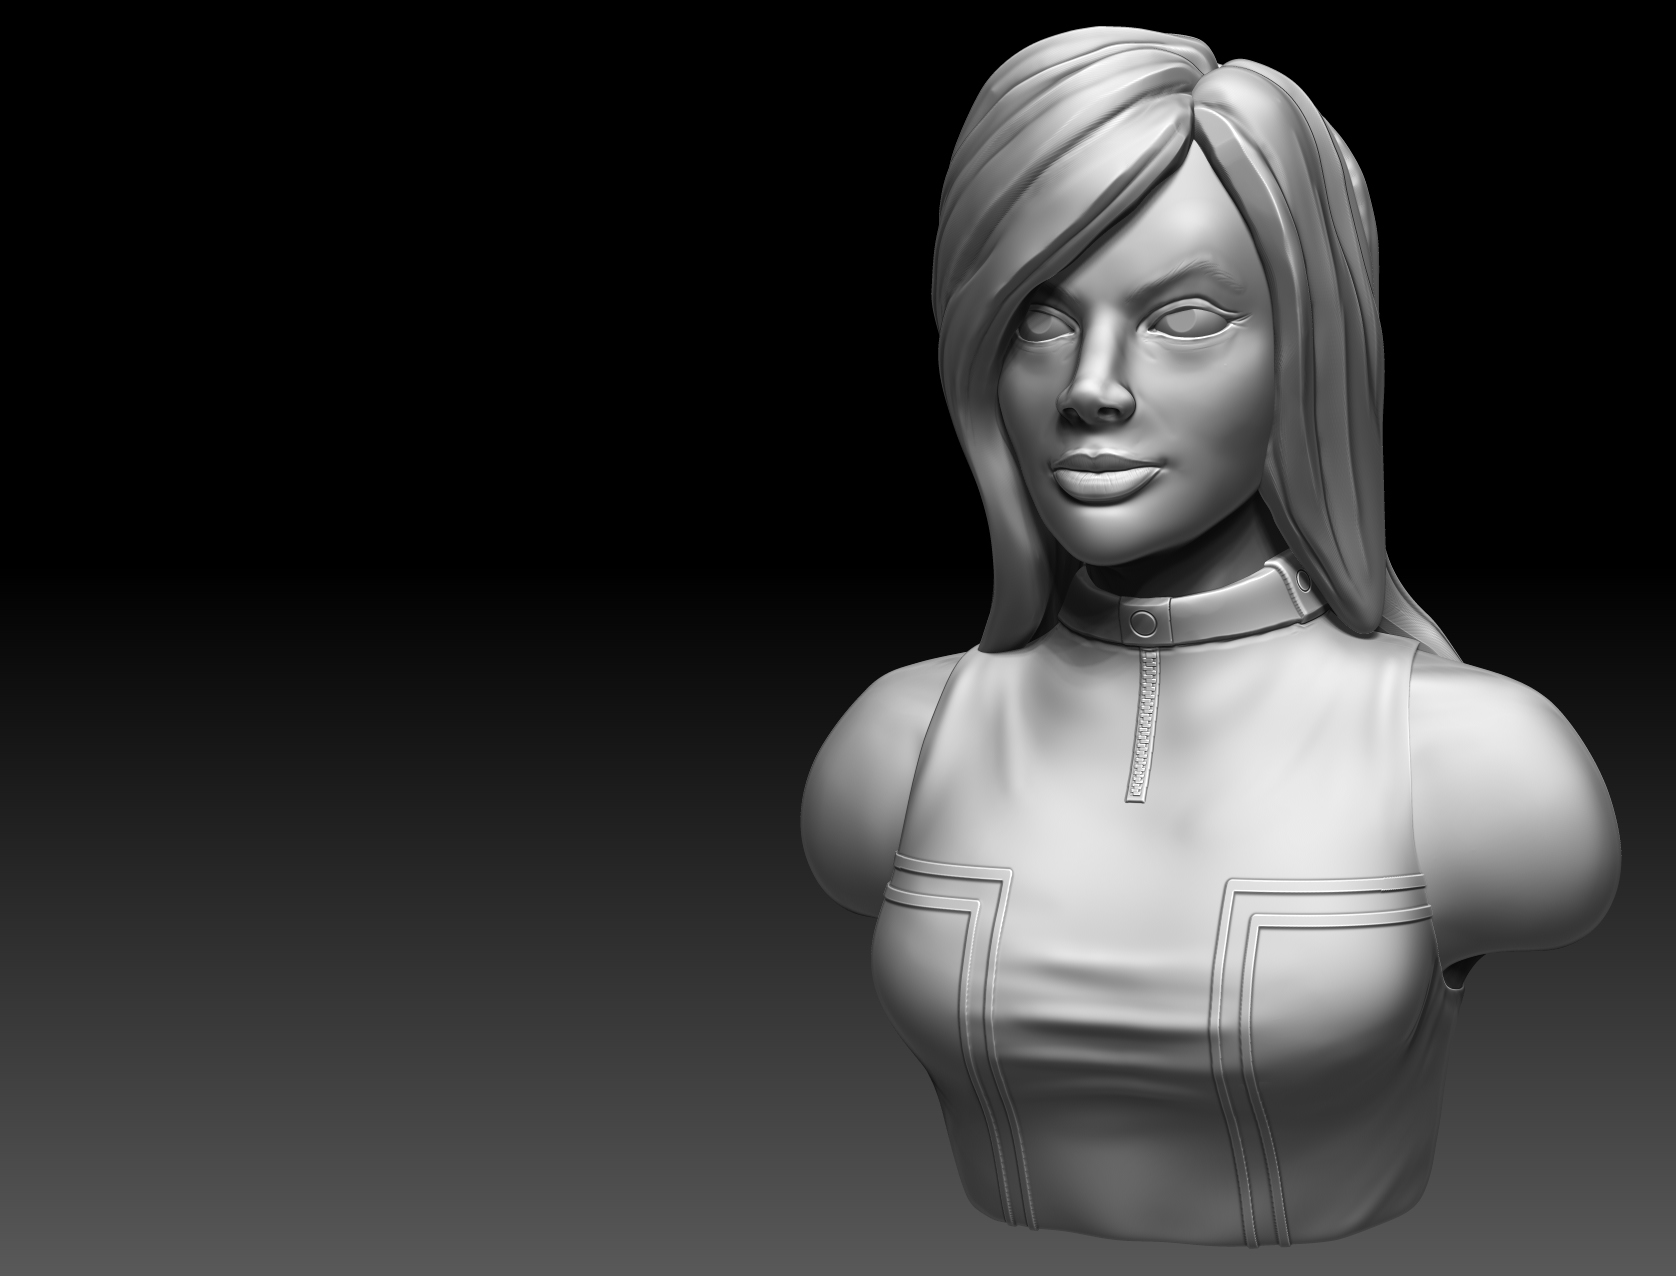 girl_bust_by_captainapoc-d93ipyf.jpg